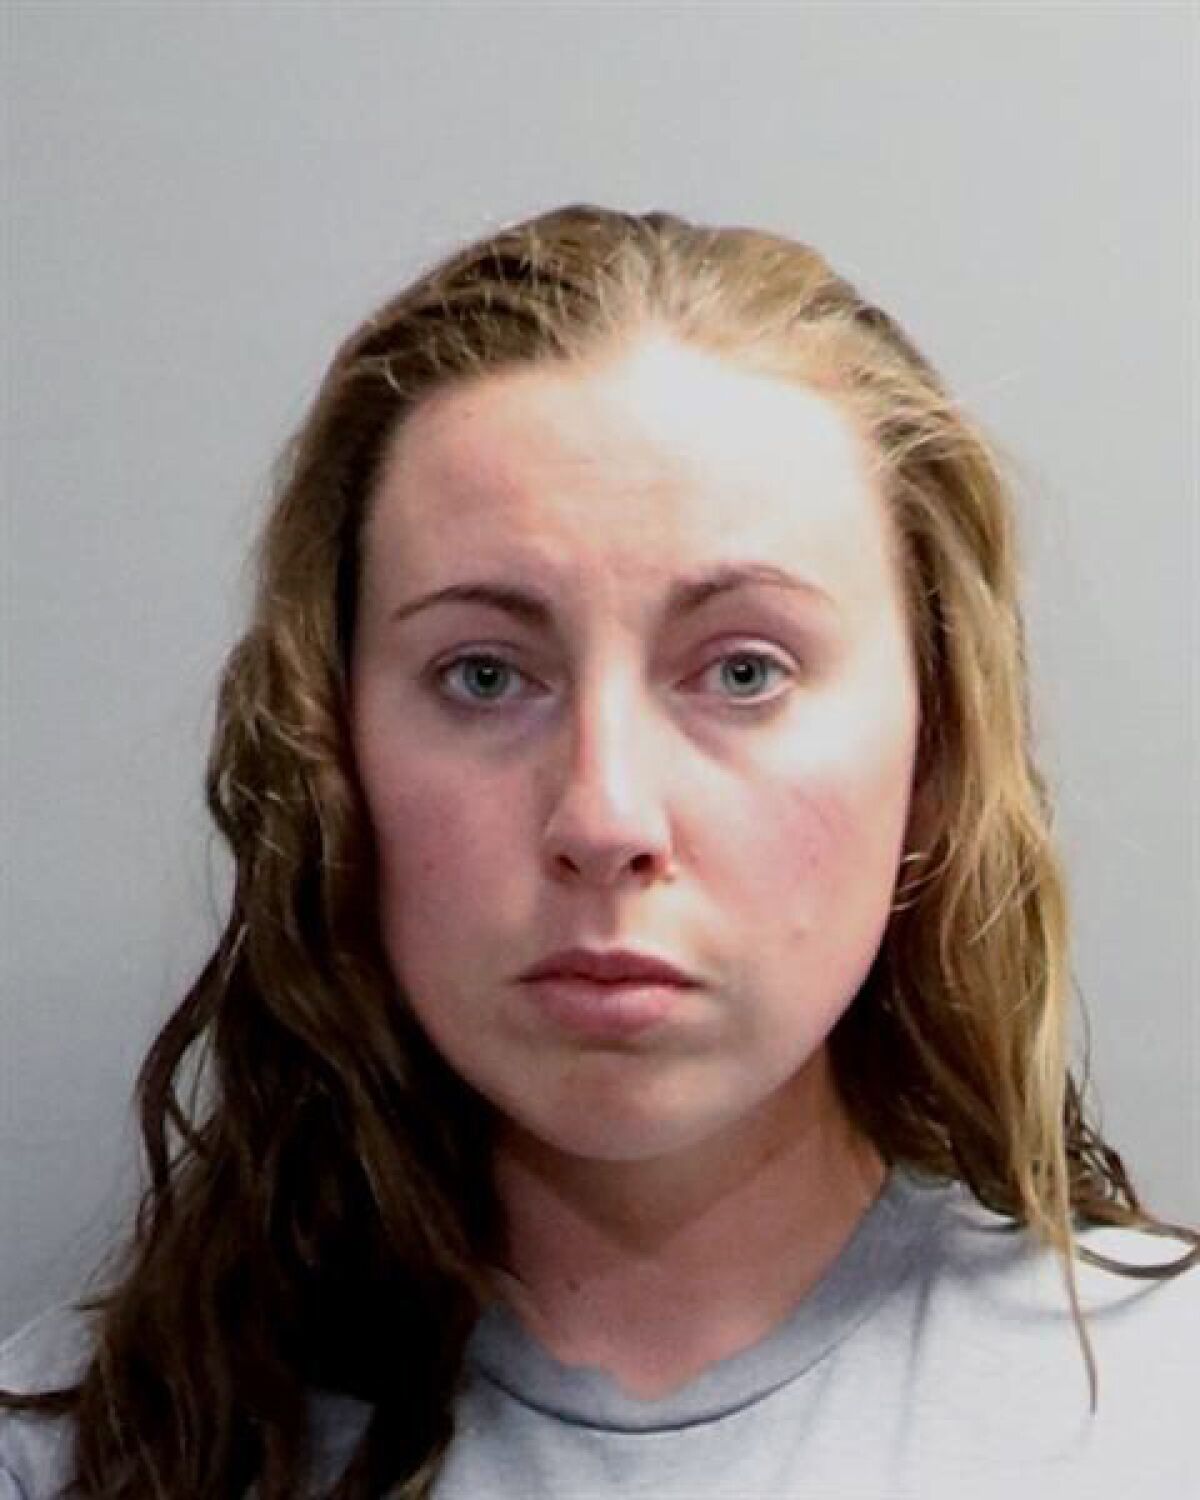 A photo provided by the Oakland County Sheriff's Office shows Jillian Wuestenberg. Wuestenberg and her husband, Eric Wuestenberg, were arrested after at least one handgun was pulled on a Black woman and her daughters during a videotaped confrontation in a restaurant parking lot in Orion Township, Mich., authorities said Thursday, July 2, 2020. The two were charged Thursday with felonious assault, Oakland County Prosecutor Jessica Cooper said in a release. (Oakland County Sheriff's Office via AP)